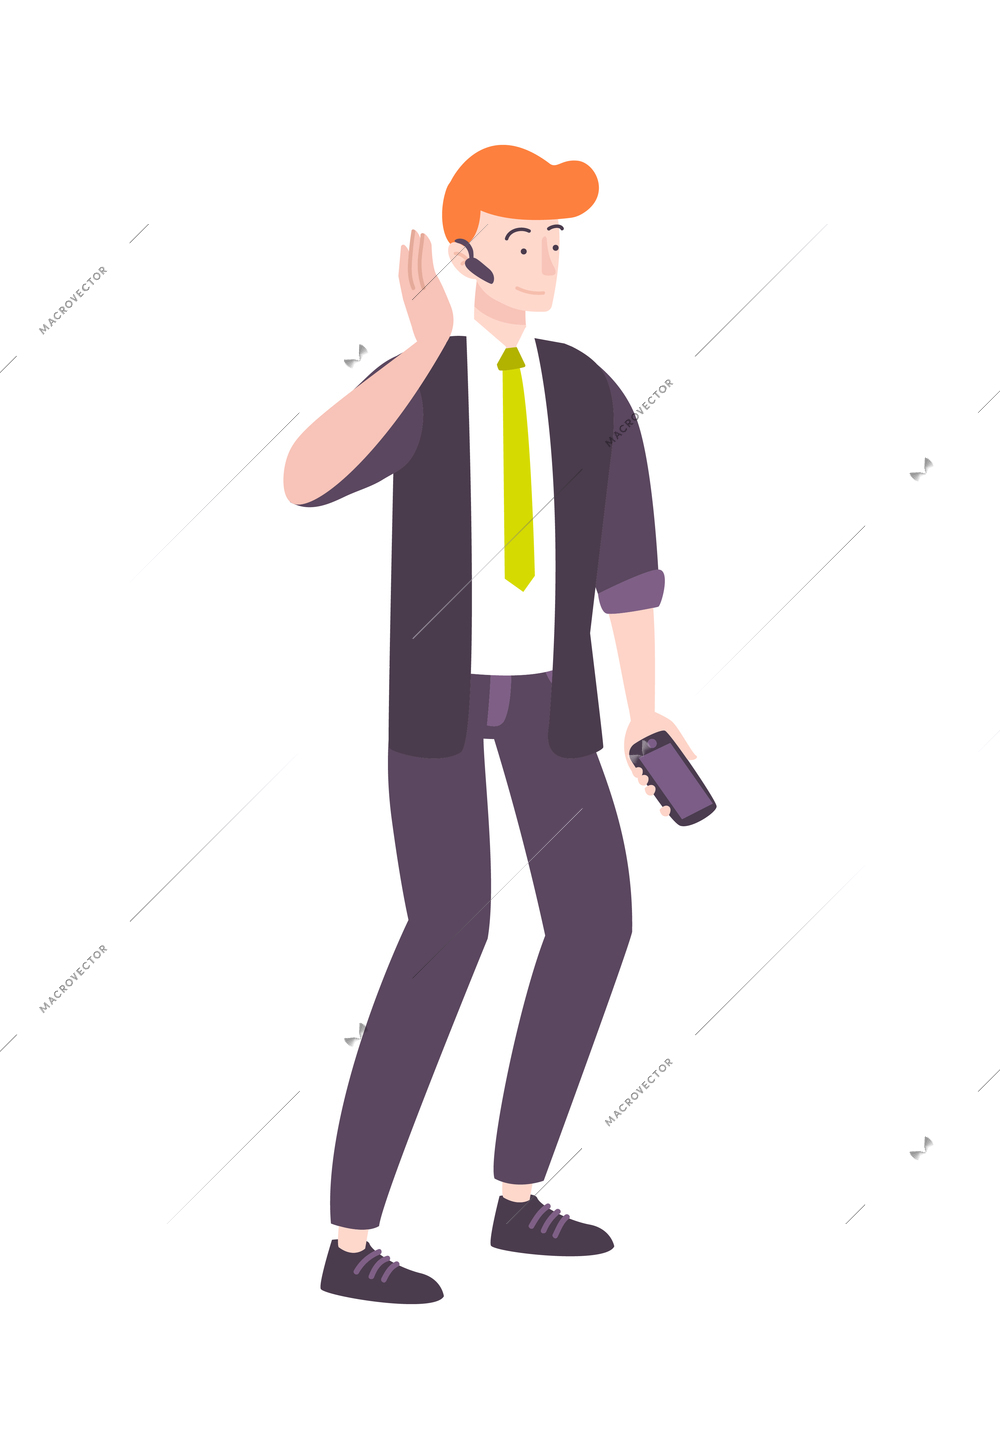 People gadget smart composition with isolated doodle style human character using electronic devices vector illustration